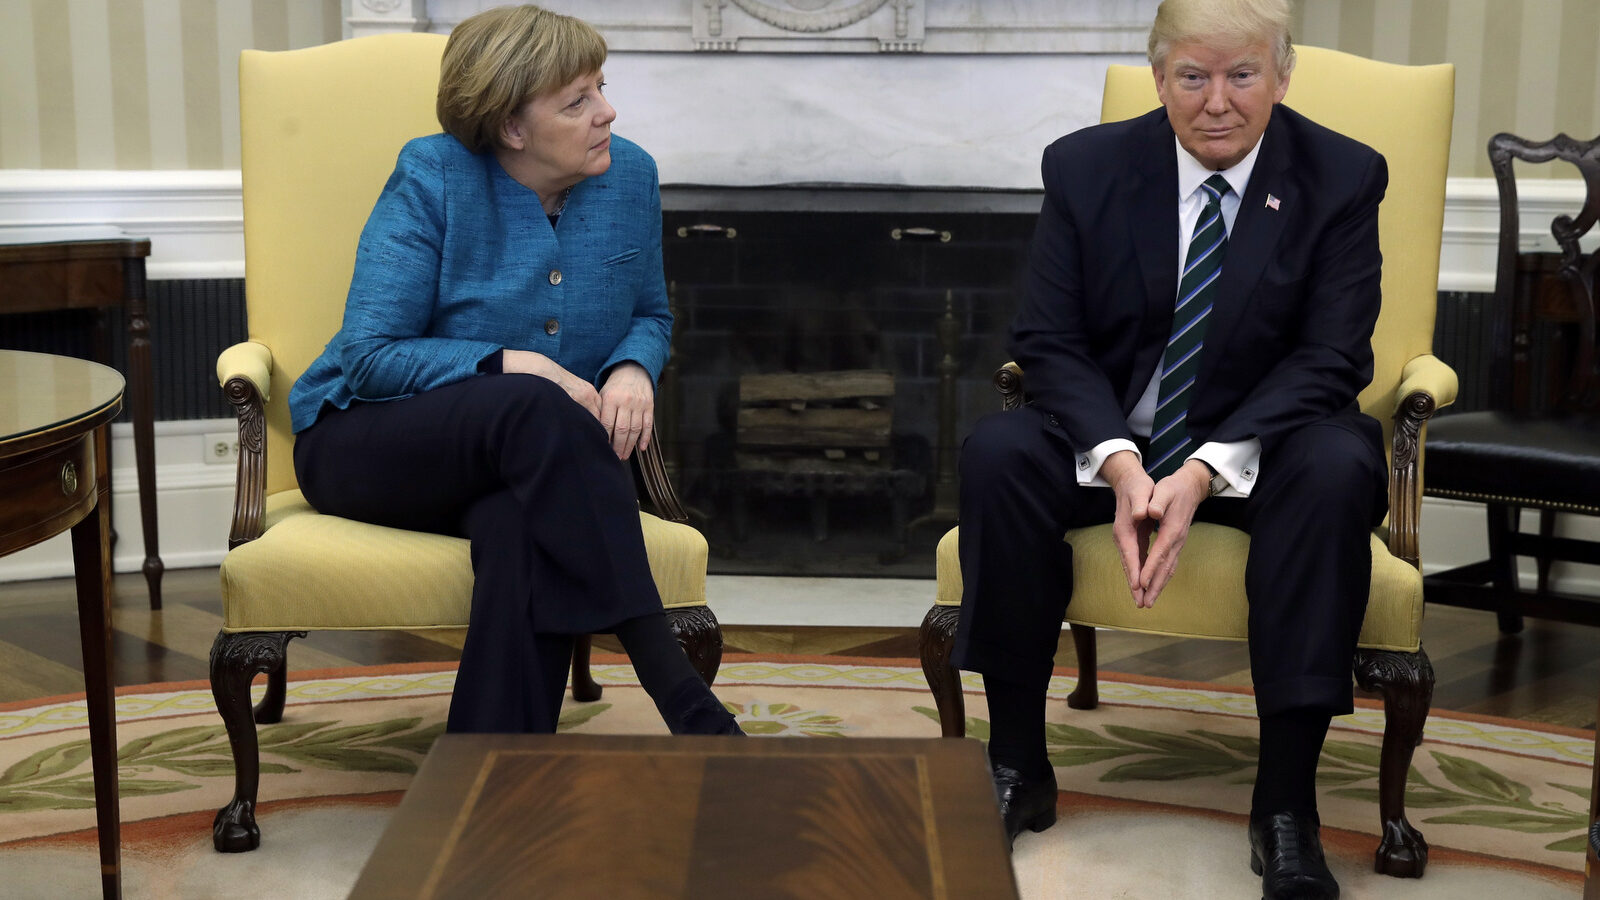 President Donald Trump meets with German Chancellor Angela Merkel in the Oval Office of the White House in Washington, Friday, March 17, 2017. (AP/Evan Vucci)